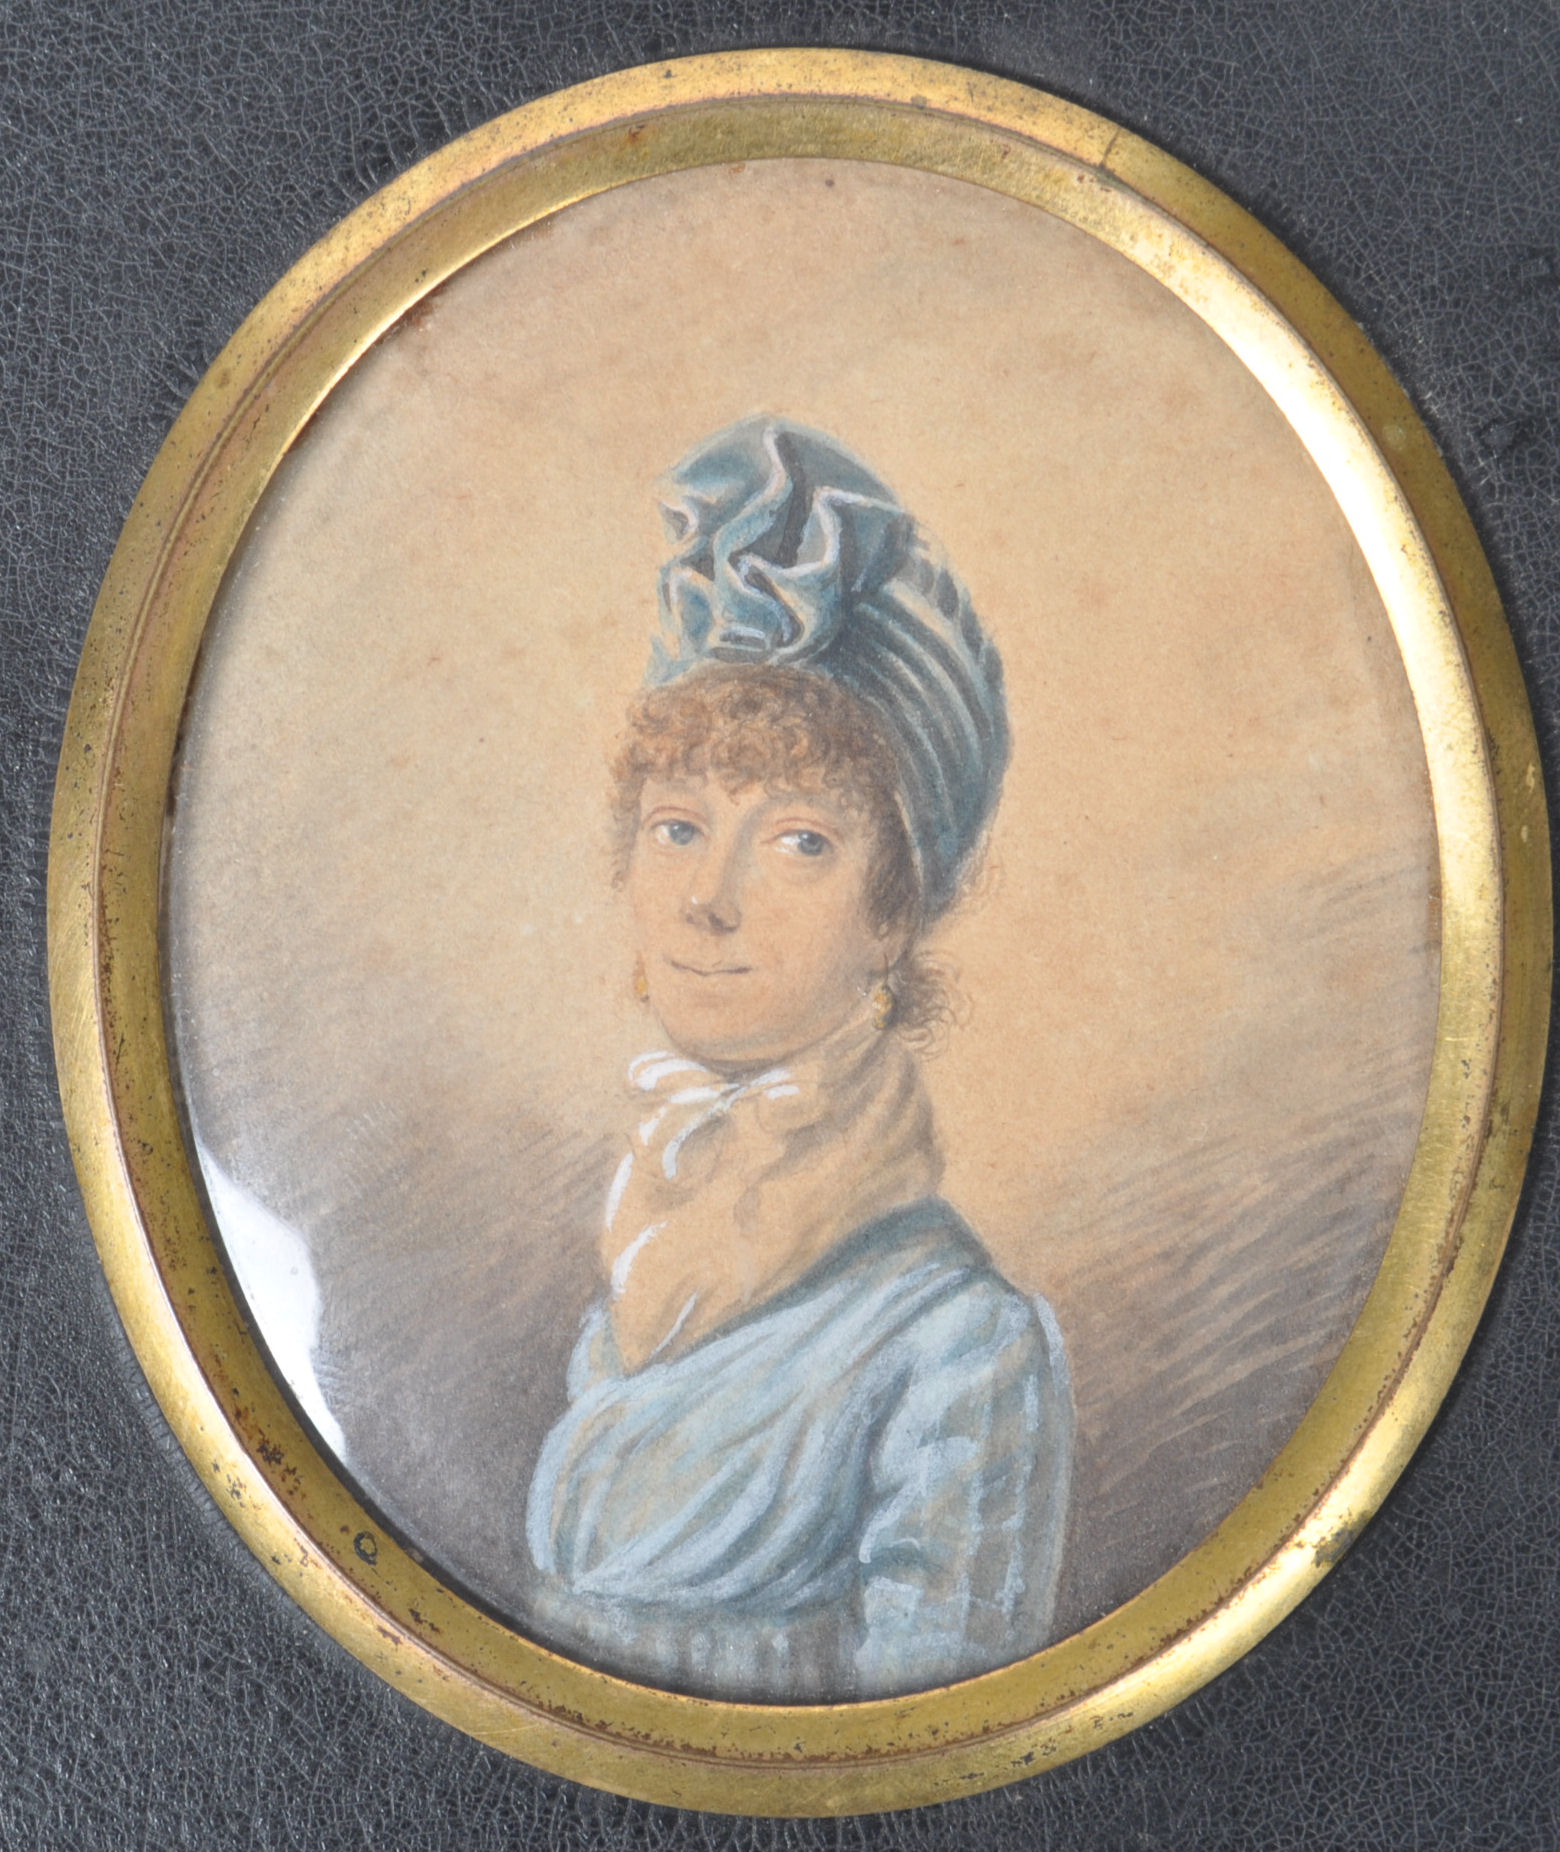 EARLY 19TH CENTURY GEORGIAN PORTRAIT MINIATURE PAINTING - Image 2 of 4